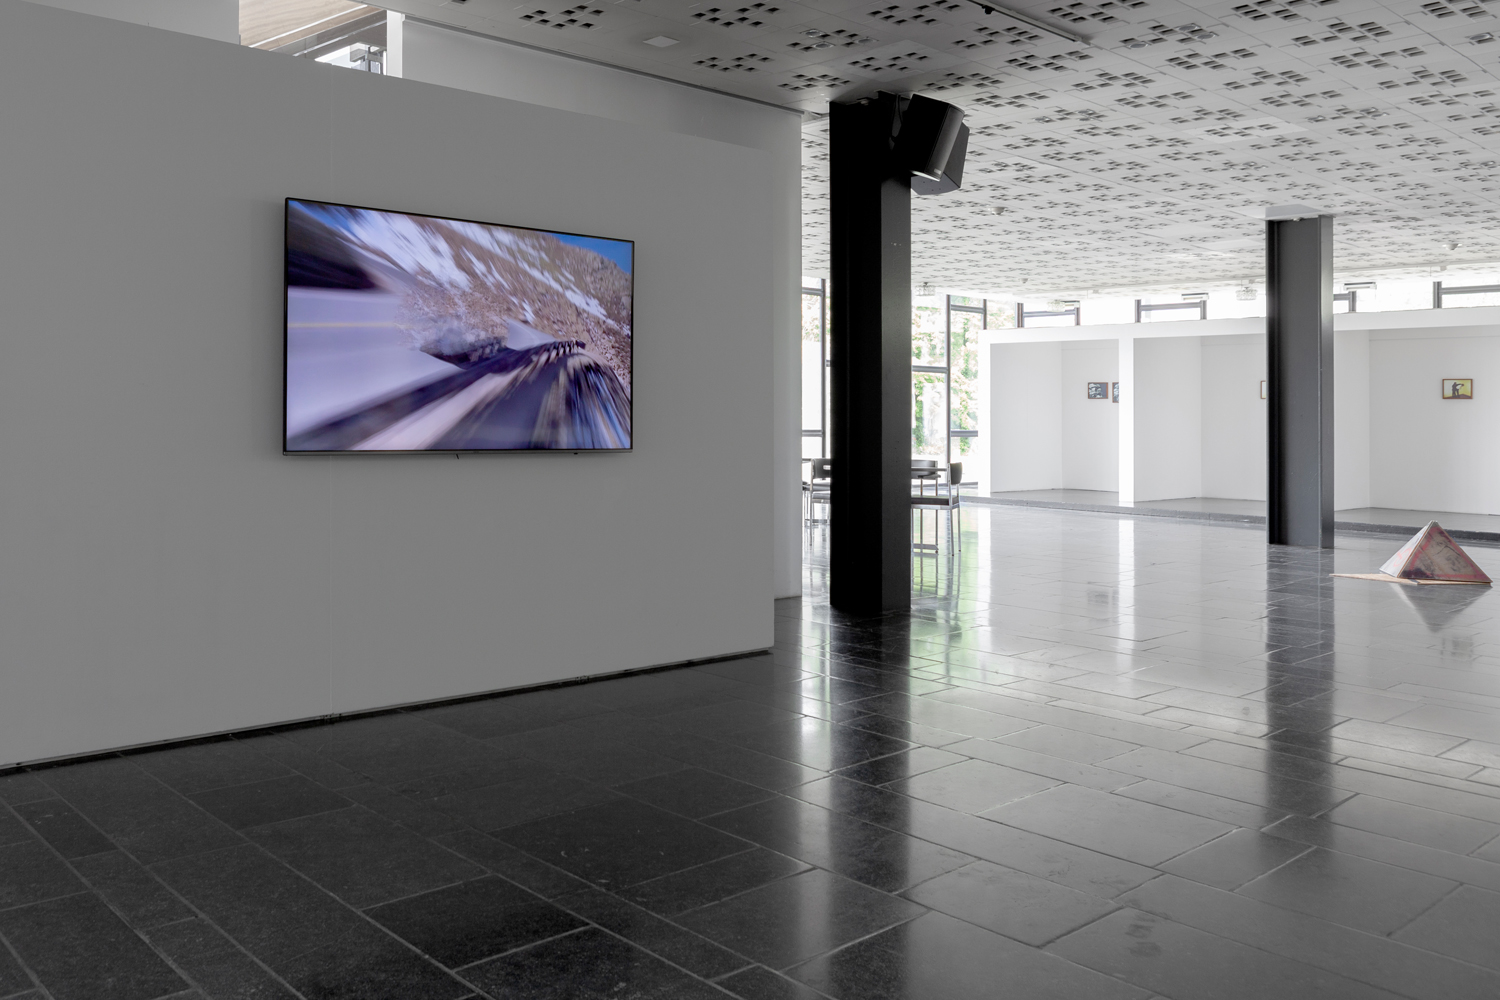 Zach Nader, ‘Optional features shown’, 2012, single-channel HD video, Courtesy of the artist and Microscope Gallery